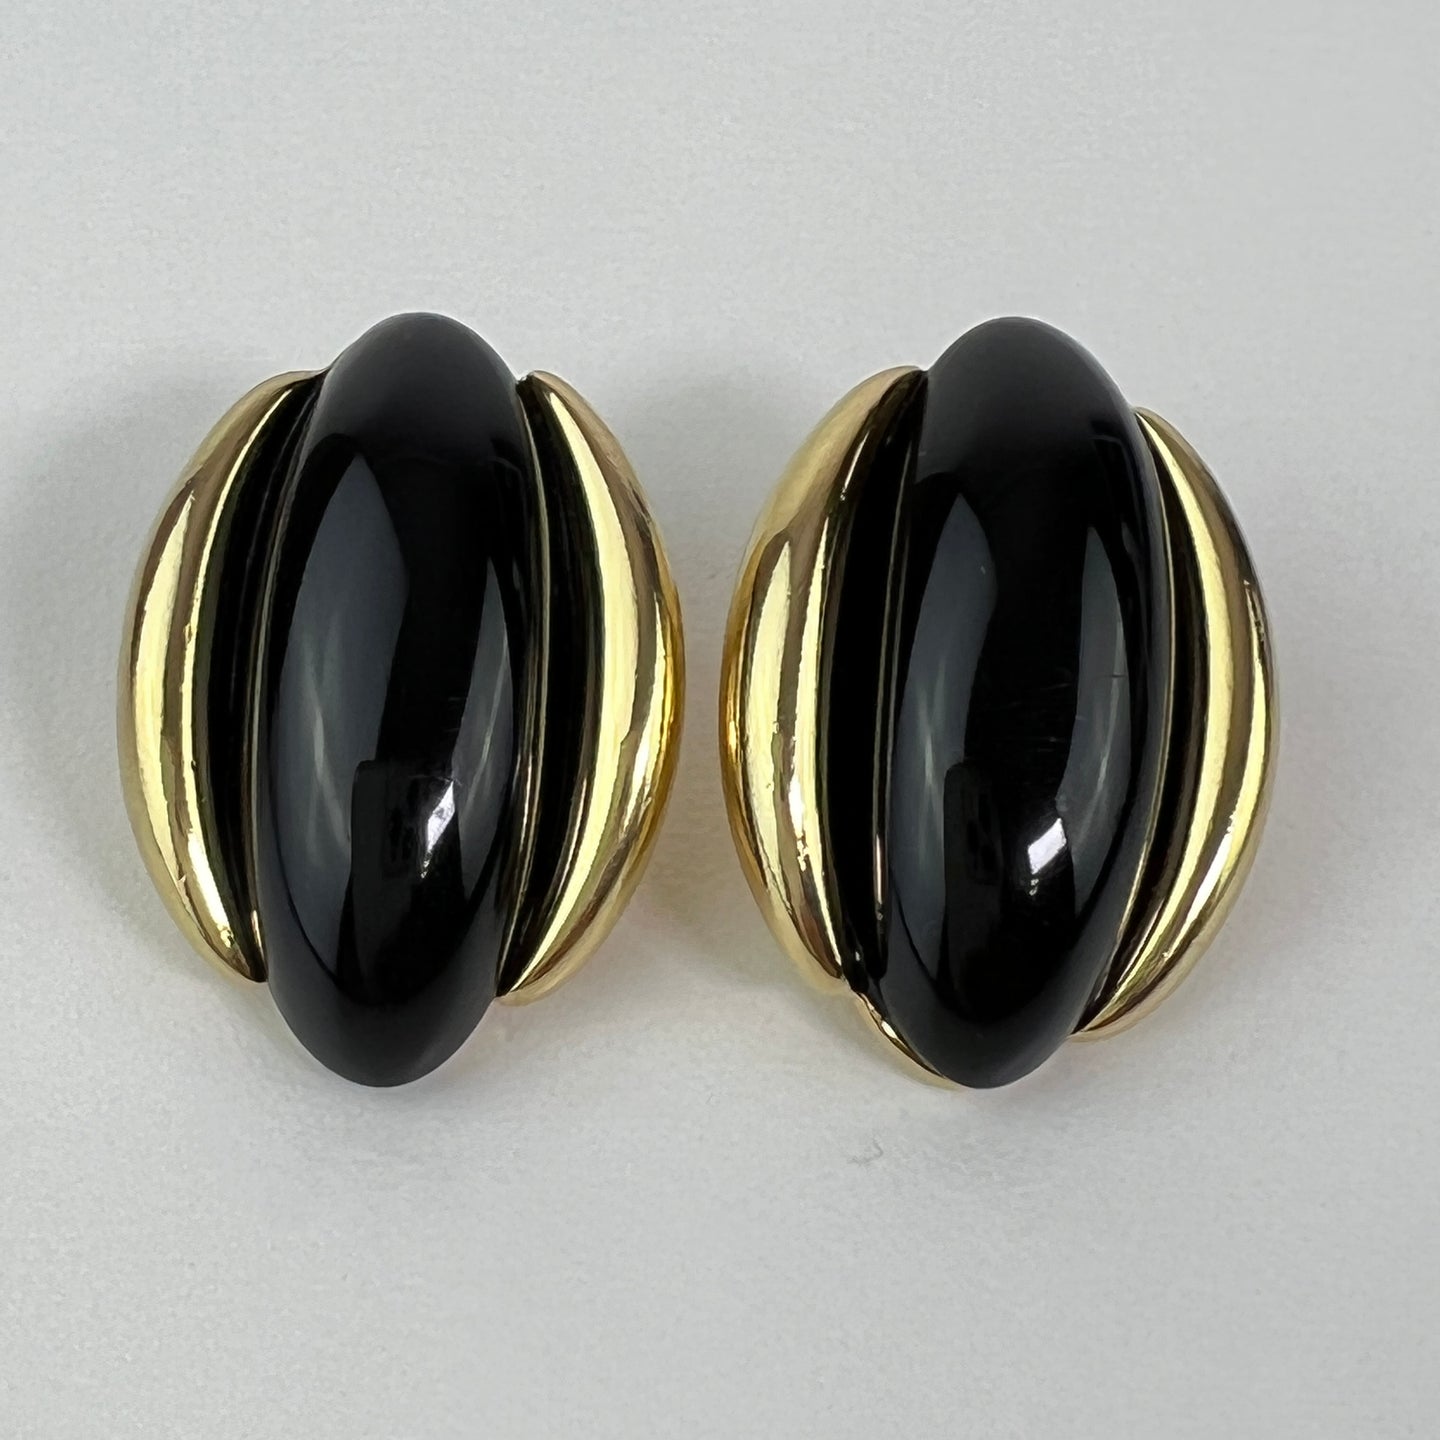 Vintage Monet Black Cabachon Gold Tone Oval Clip on Earrings